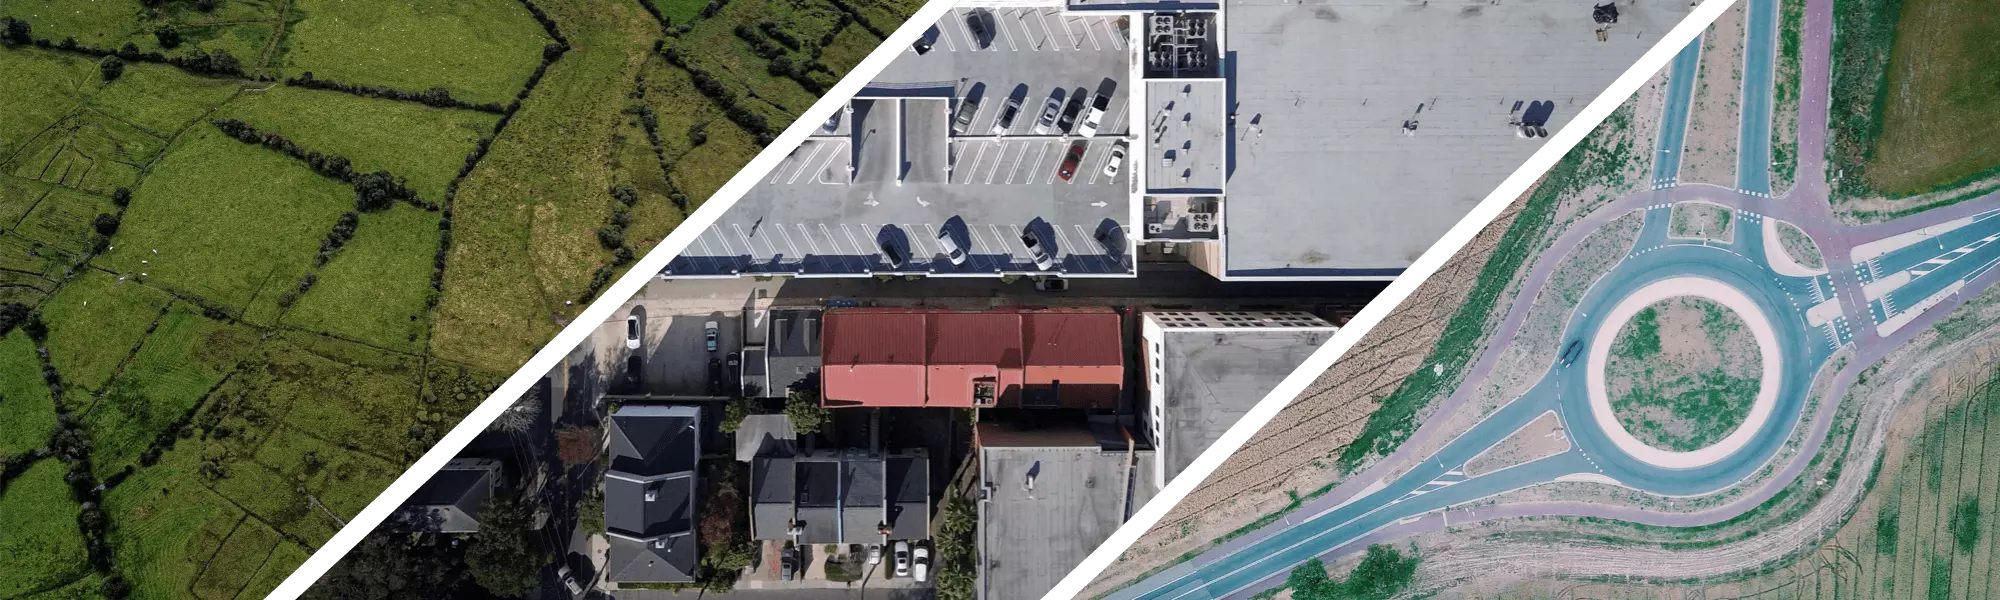 Drone mapping in 4 steps and custom maps